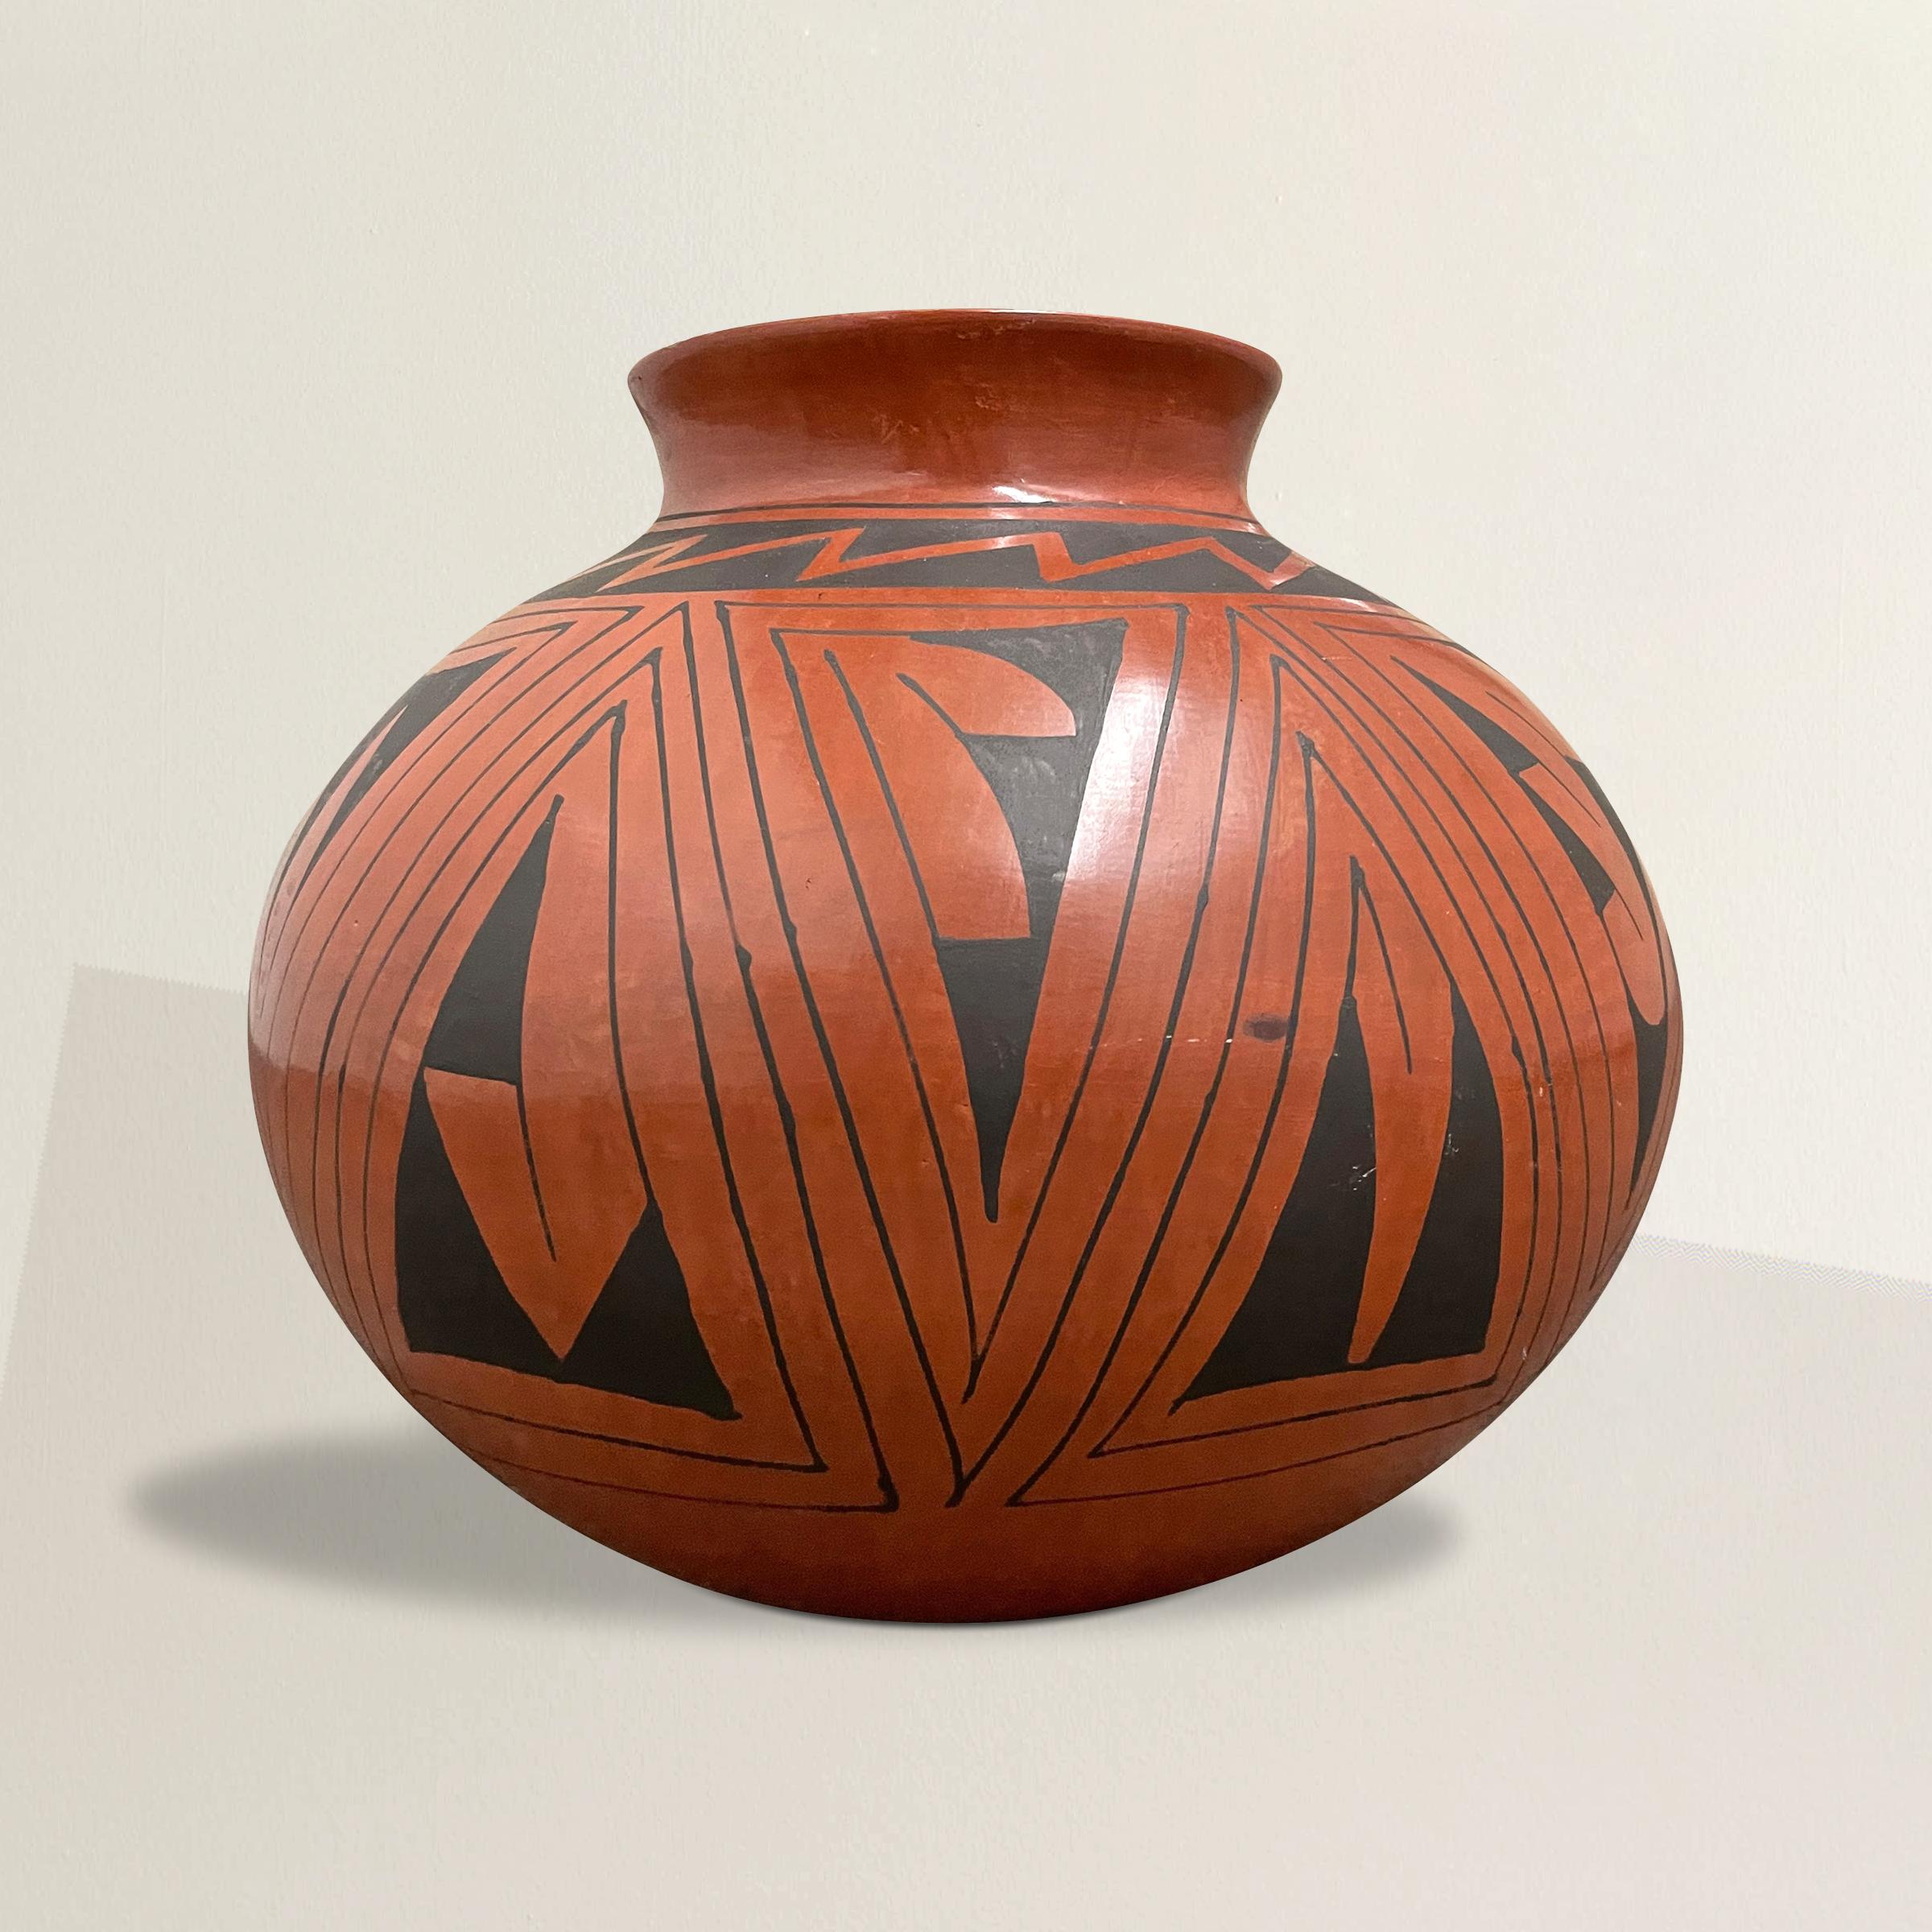 A striking vintage Casa Grandes pottery vase with a large belly, narrow neck, and wide lip, and decorated with black geometric patterns repeated around the pot. Signed on the bottom.